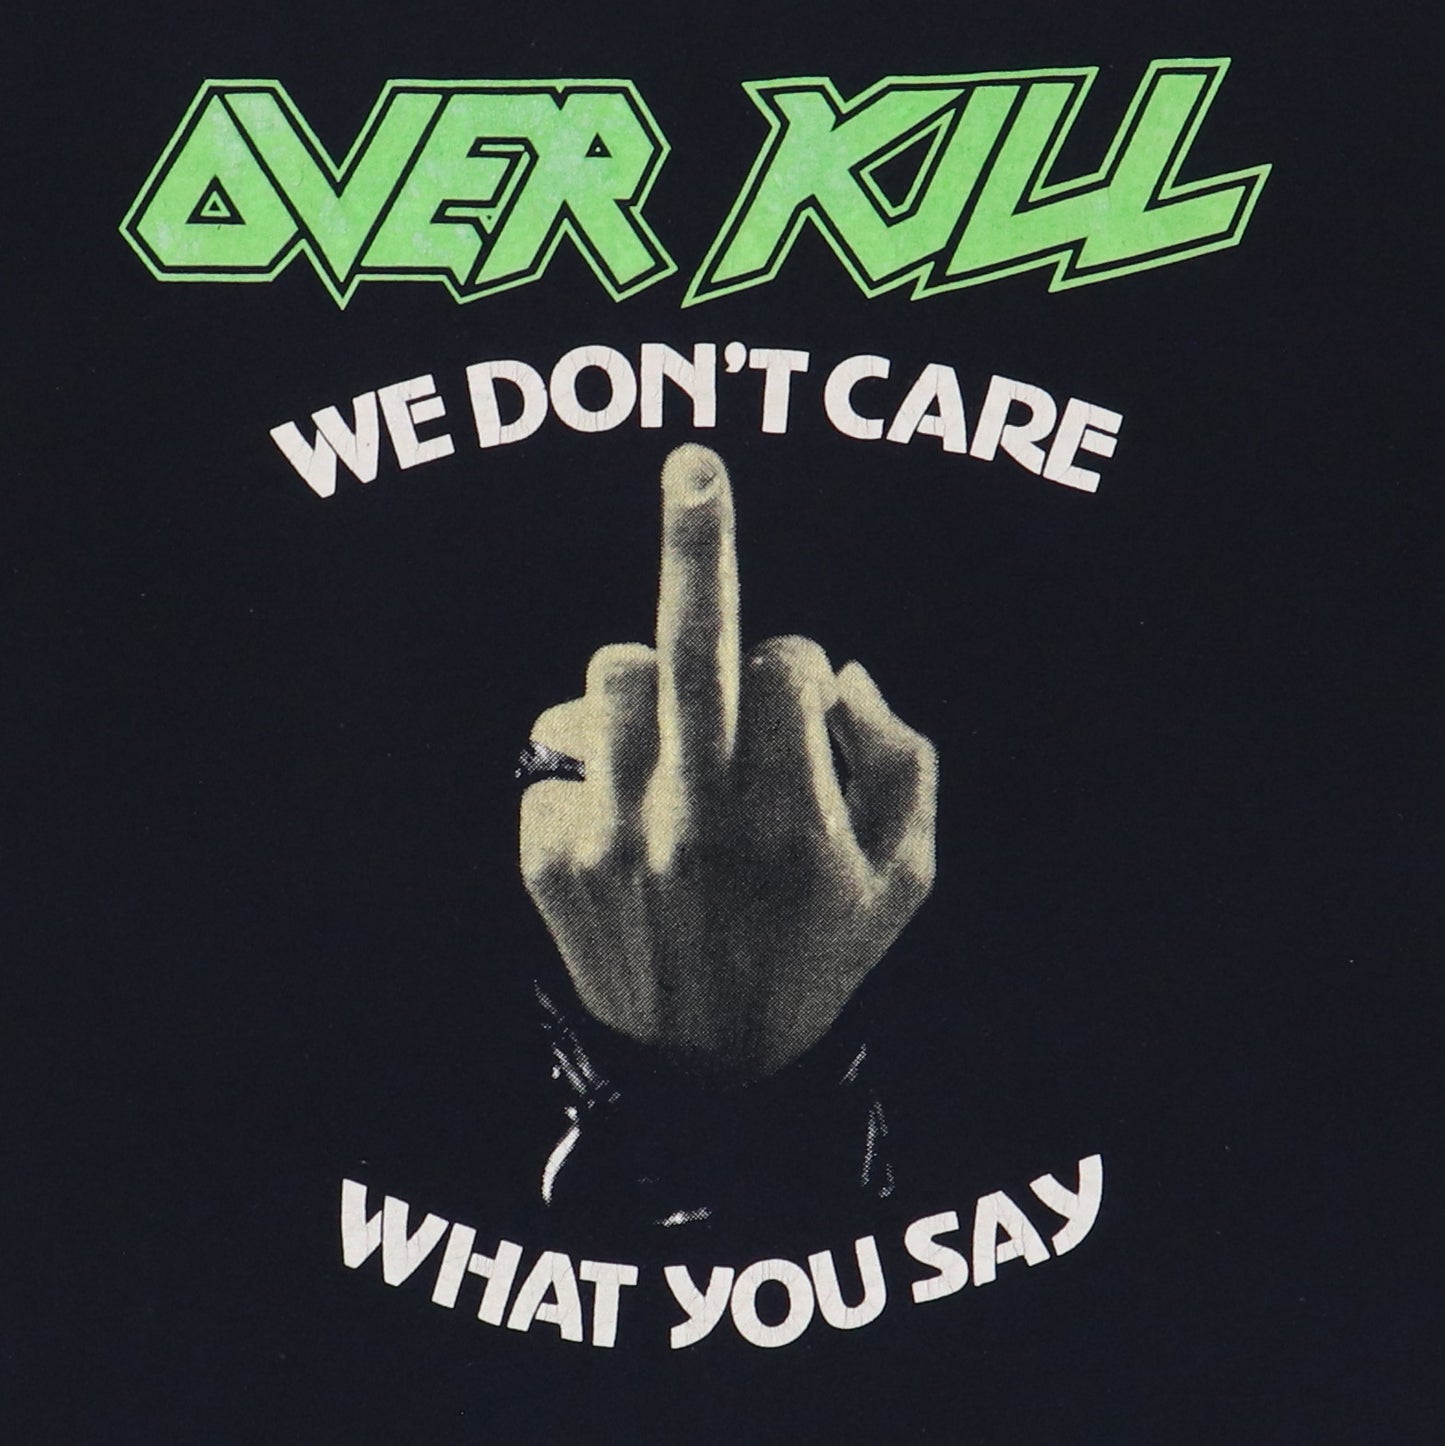 1987 Over Kill We Don't Care What You Say Shirt